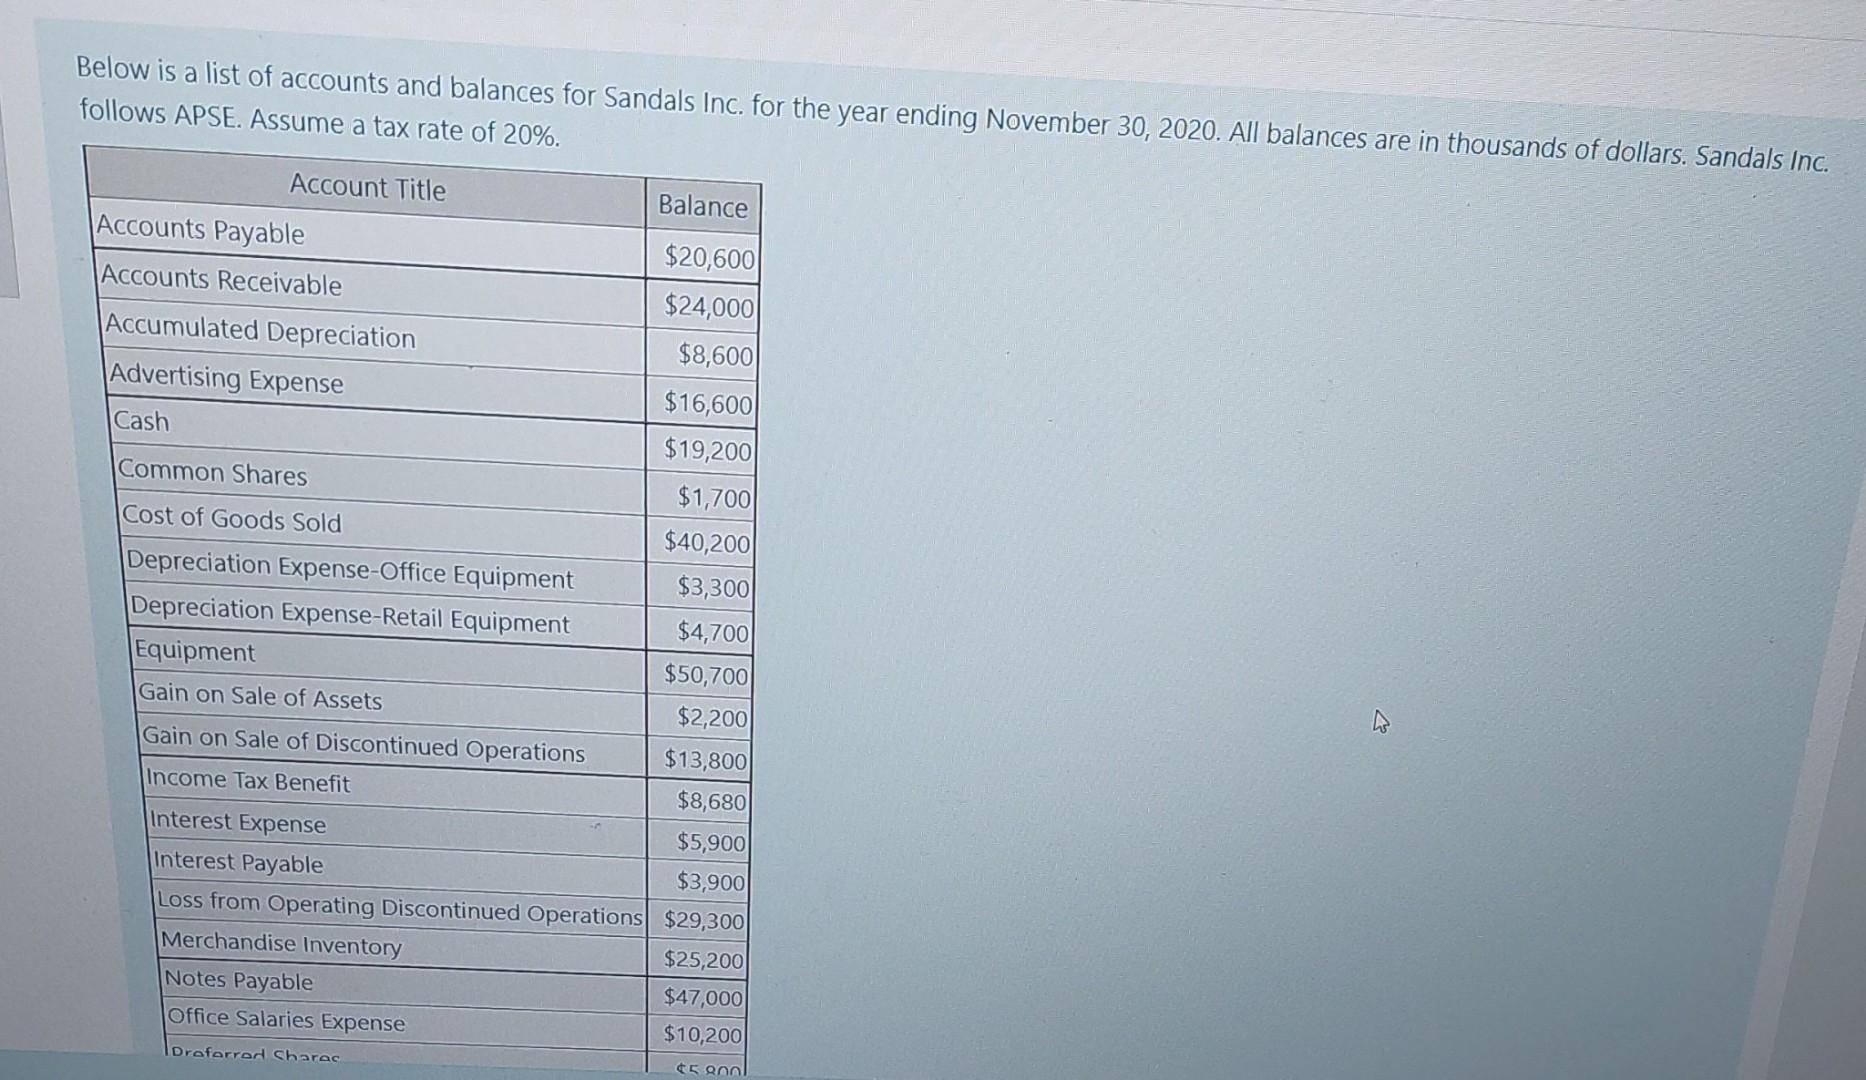 Below is a list of accounts and balances for Sandals Inc. for the year ending November 30, 2020. All balances are in thousand